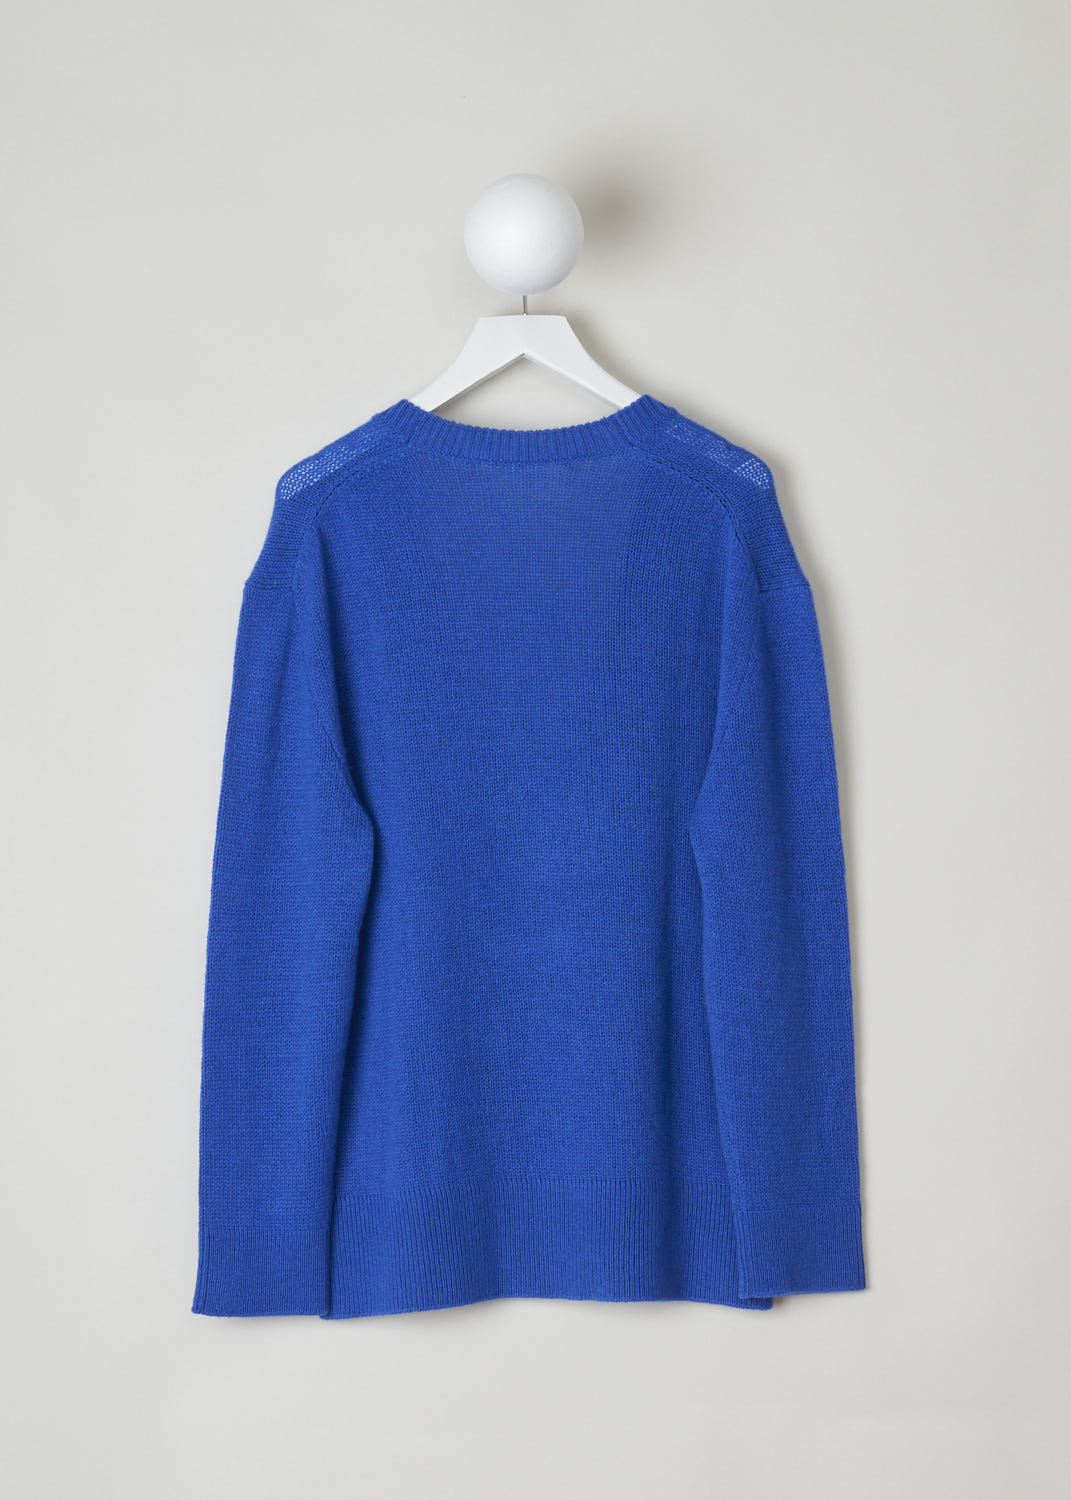 THE ROW, BLUE CASHMERE V-NECKLINE SWEATER, BAUDELIA_TOP_5508YI_87_KLEIN_BLUE, Blue, Back, This blue V-neck sweater is made from a soft blue cashmere. The cuffs, hem and neckline have a ribbed finish. 
